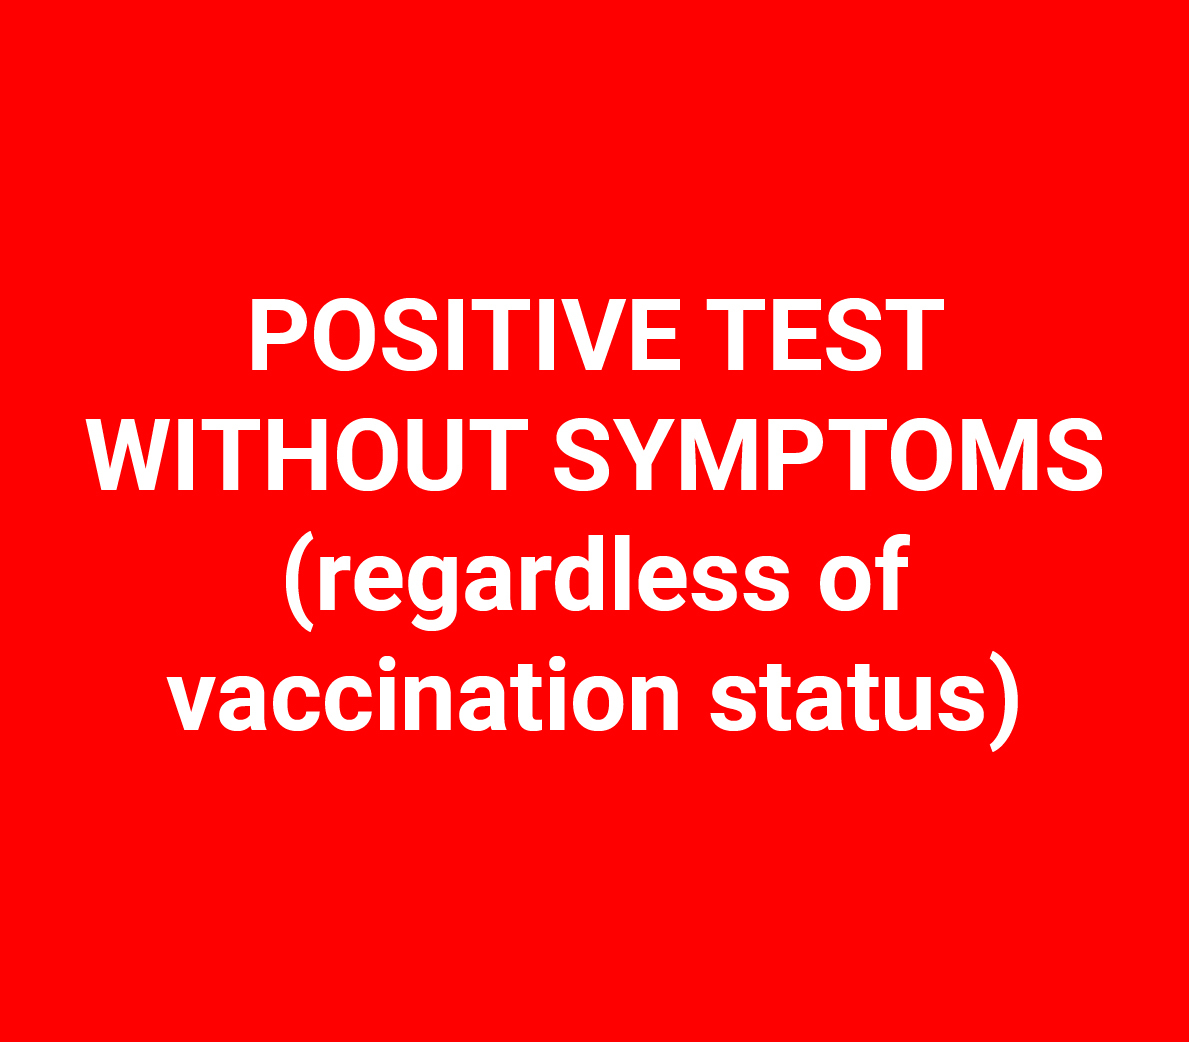 Positive Test Without Symptoms (Regardless of Vaccination Status)